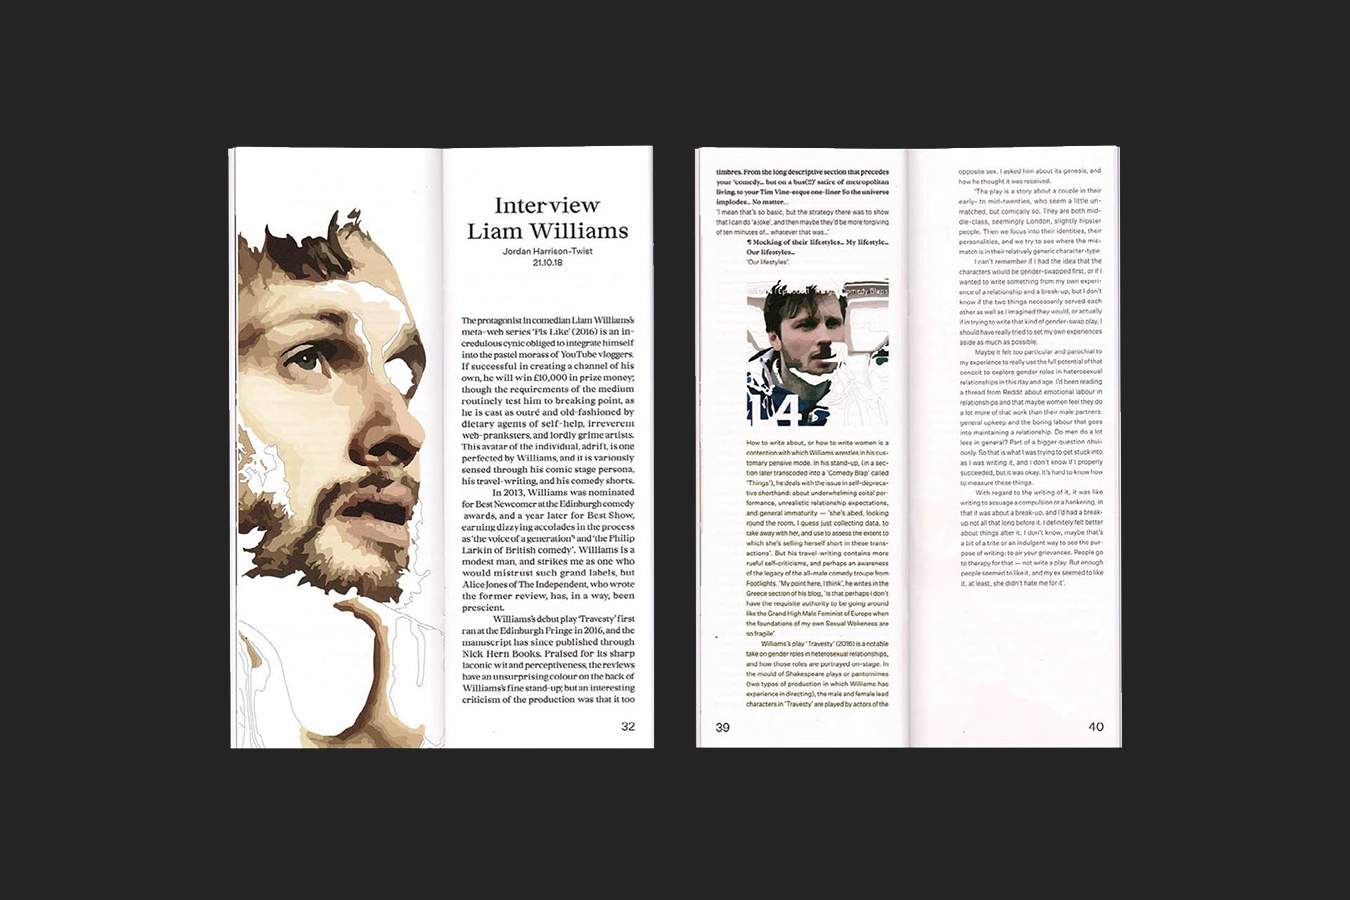 An image on one of the interviews inside the iiii publication, on the left hand side of the spread there's a large illustration of the individual being interviewed, the illustration is designed in such a way to make use of the image treatment that is part of the visual identity